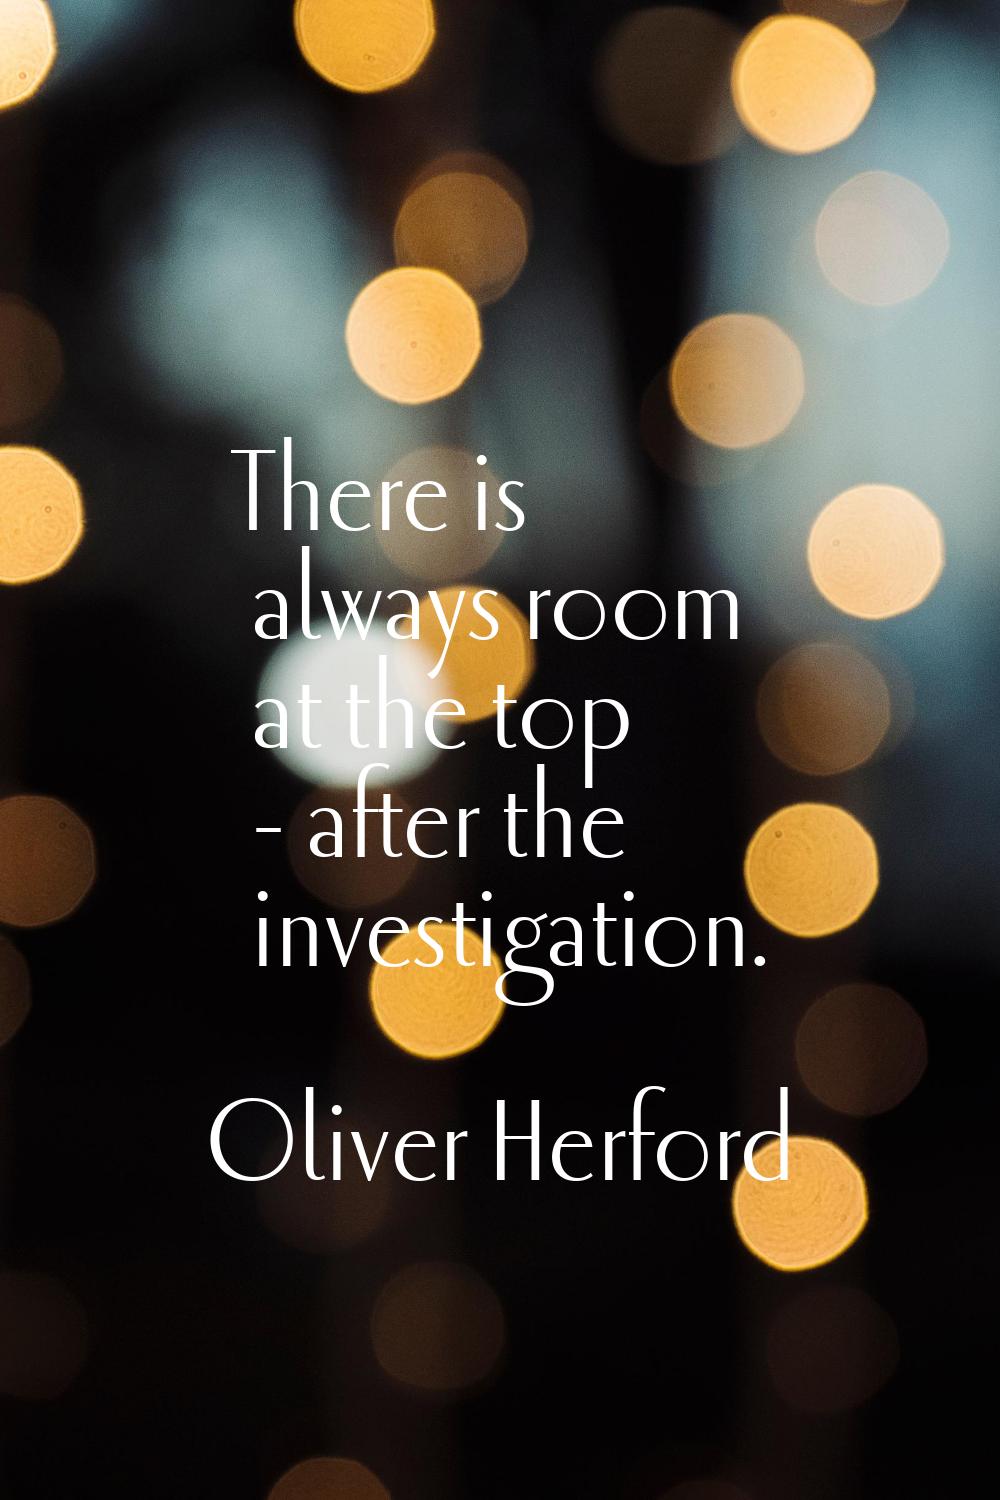 There is always room at the top - after the investigation.